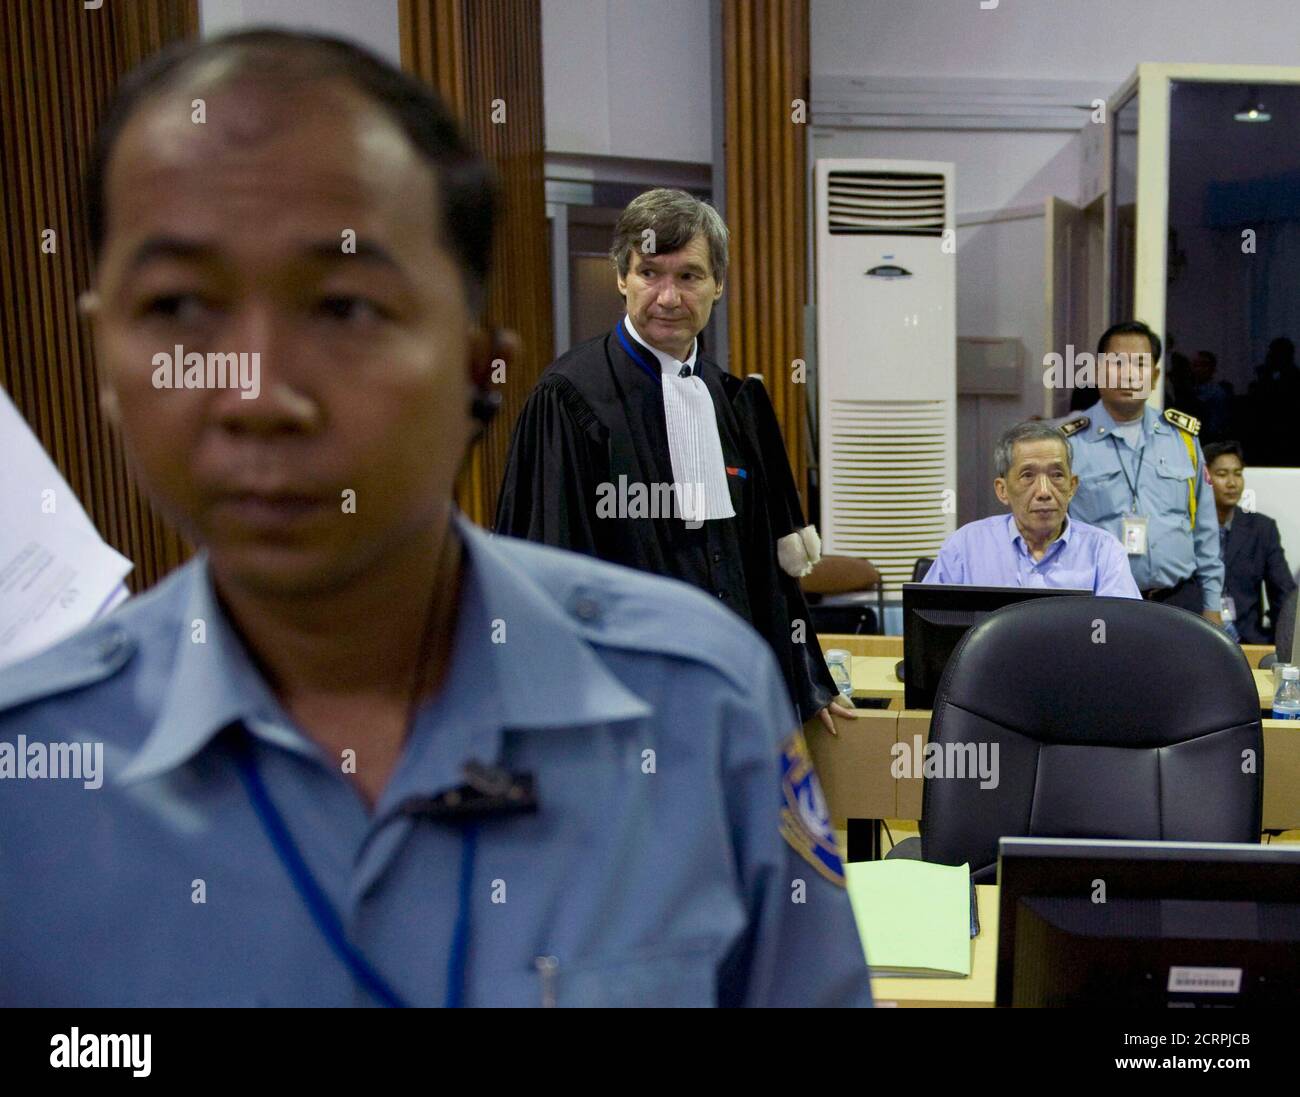 Security officials and defence attorney Francois Roux (2nd R) stand next to Kaing Guek Eav (3rd R), also known as Duch, as he awaits the start of his trial on the outskirts of Phnom Penh February 17, 2009. Duch, the ex-commandant of the notorious S-21 prison and chief Khmer Rouge torturer, faced trial for crimes against humanity on Tuesday, the first by a senior Pol Pot cadre three decades since the end of a regime blamed for 1.7 million deaths.  REUTERS/Adrees Latif   (CAMBODIA) Stock Photo